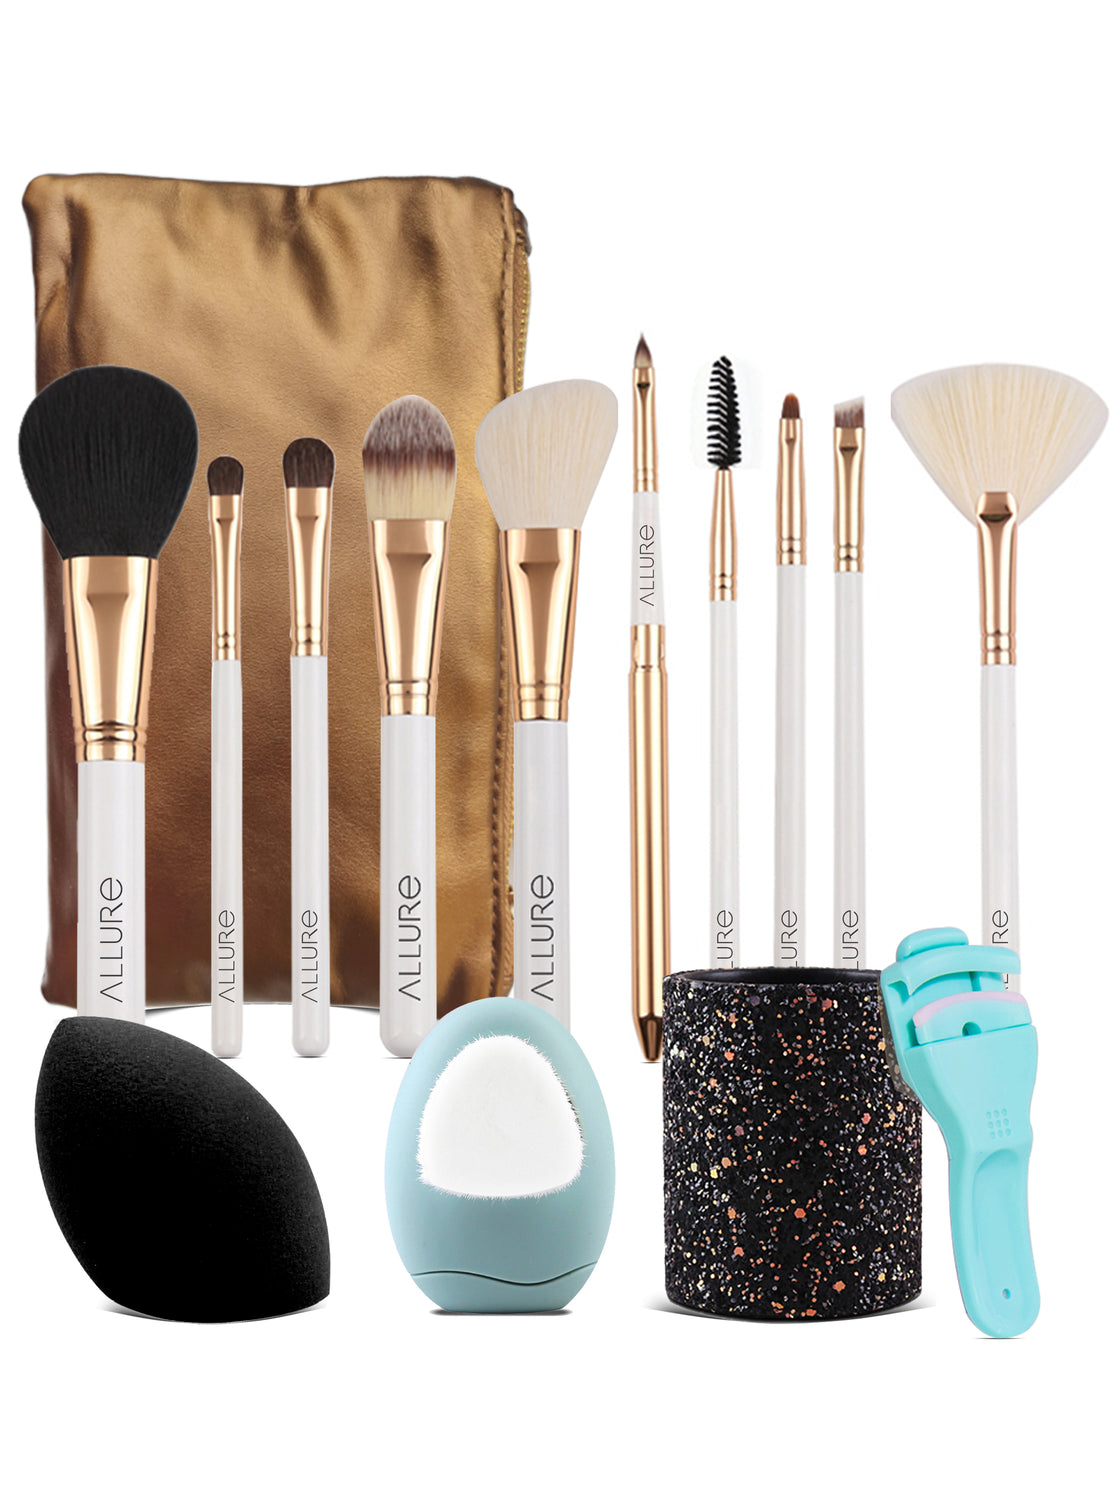 Gift Set Contains 10 Pc Makeup Brush Set & Other Essential Makeup Tools-3